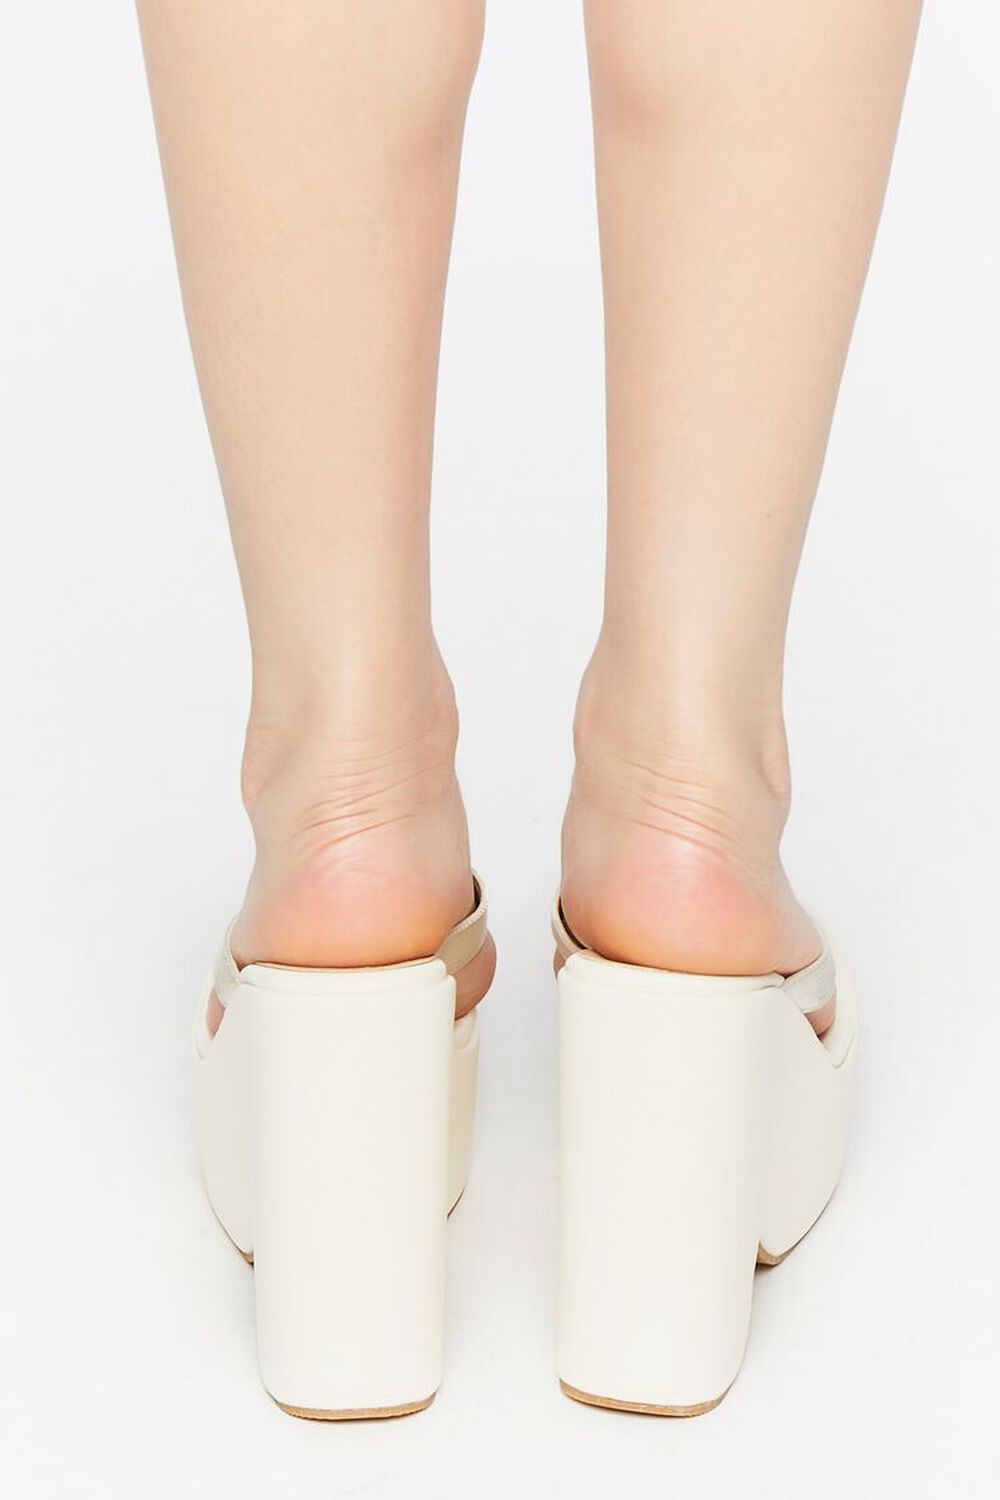 NUDE Faux Leather Platform Thong Wedges, image 3